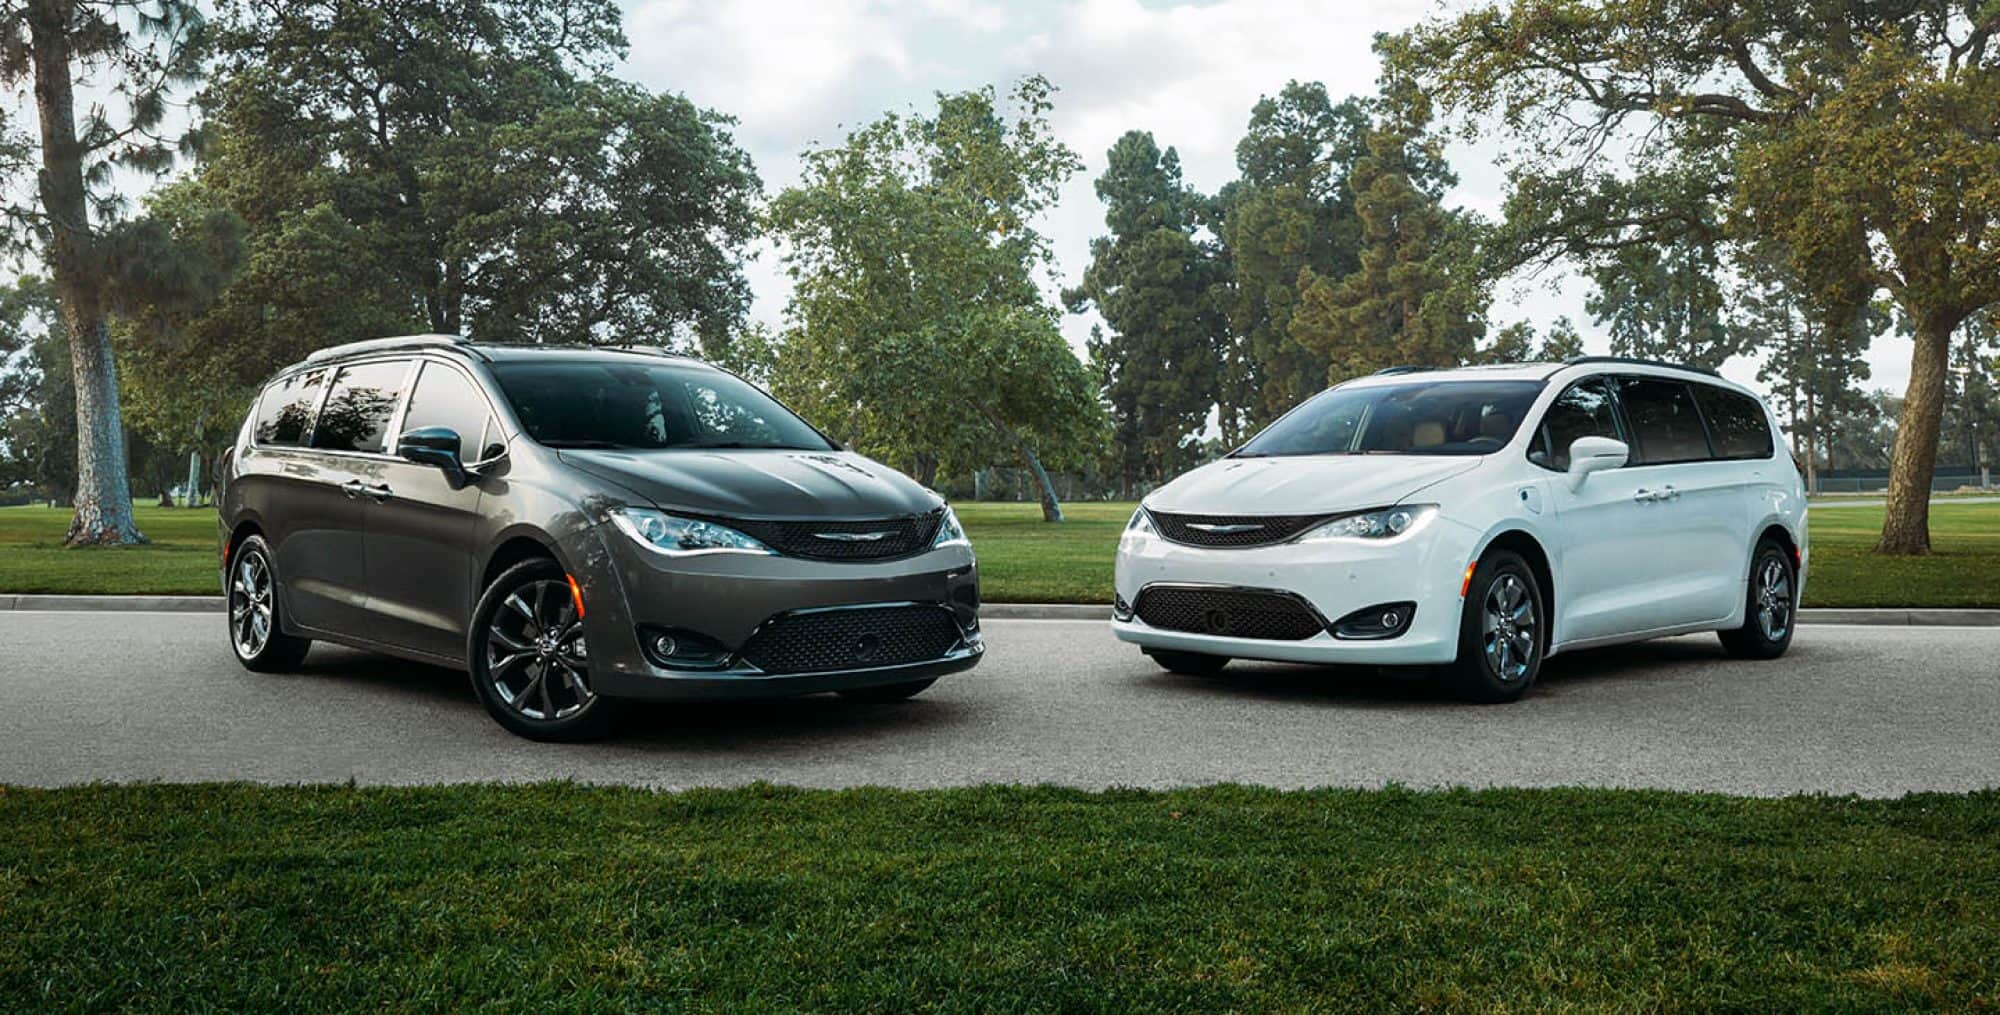 Trim Levels of the 2020 Chrysler Pacifica 